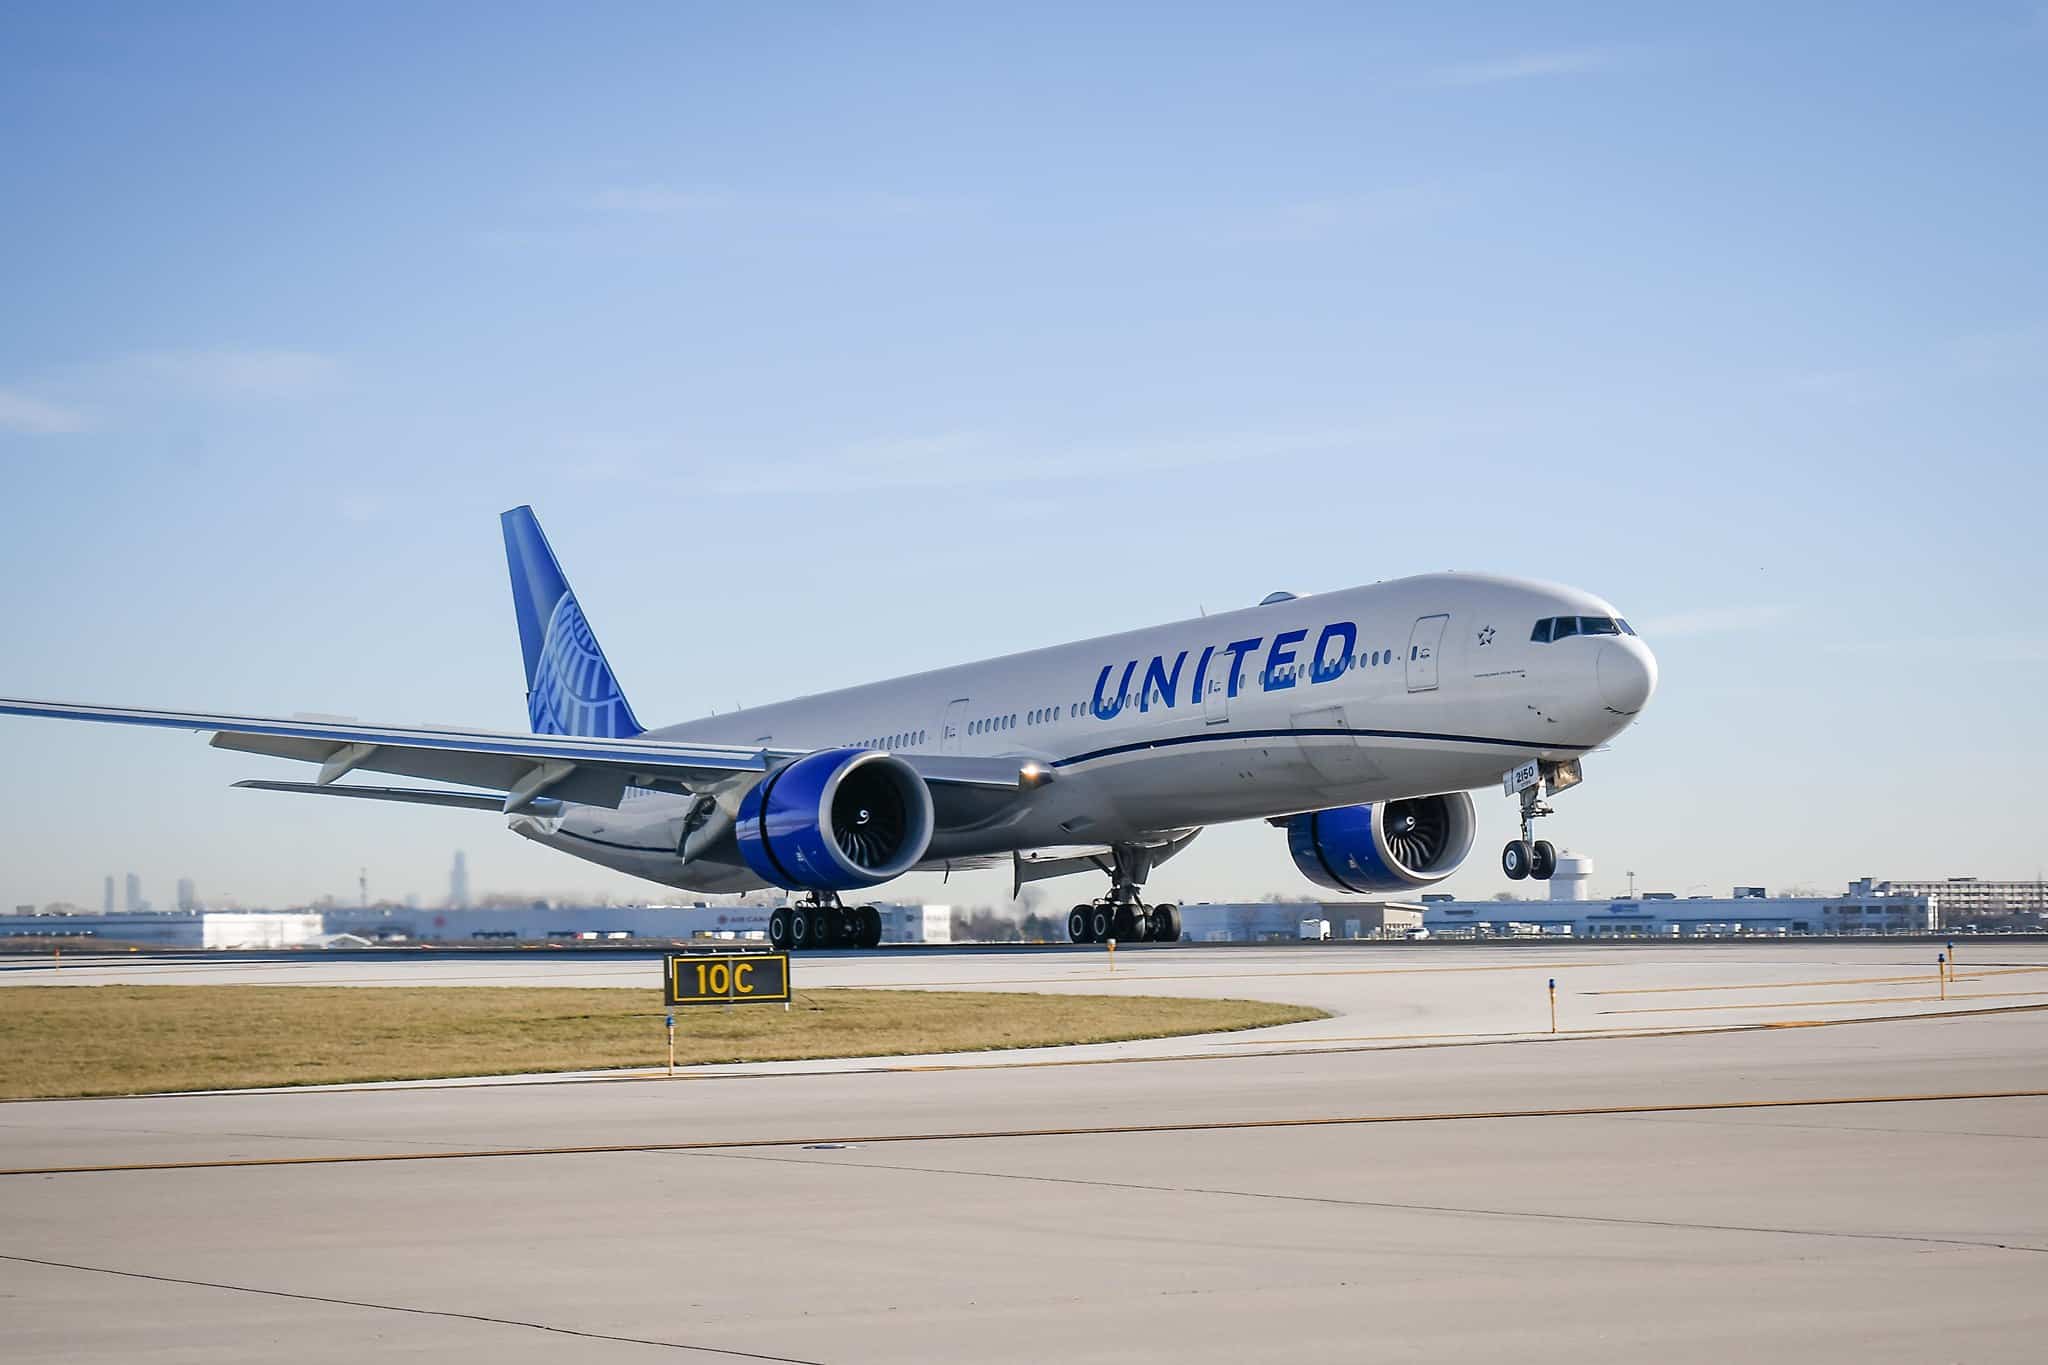 United Airlines launches summer flights from U.S to Greece